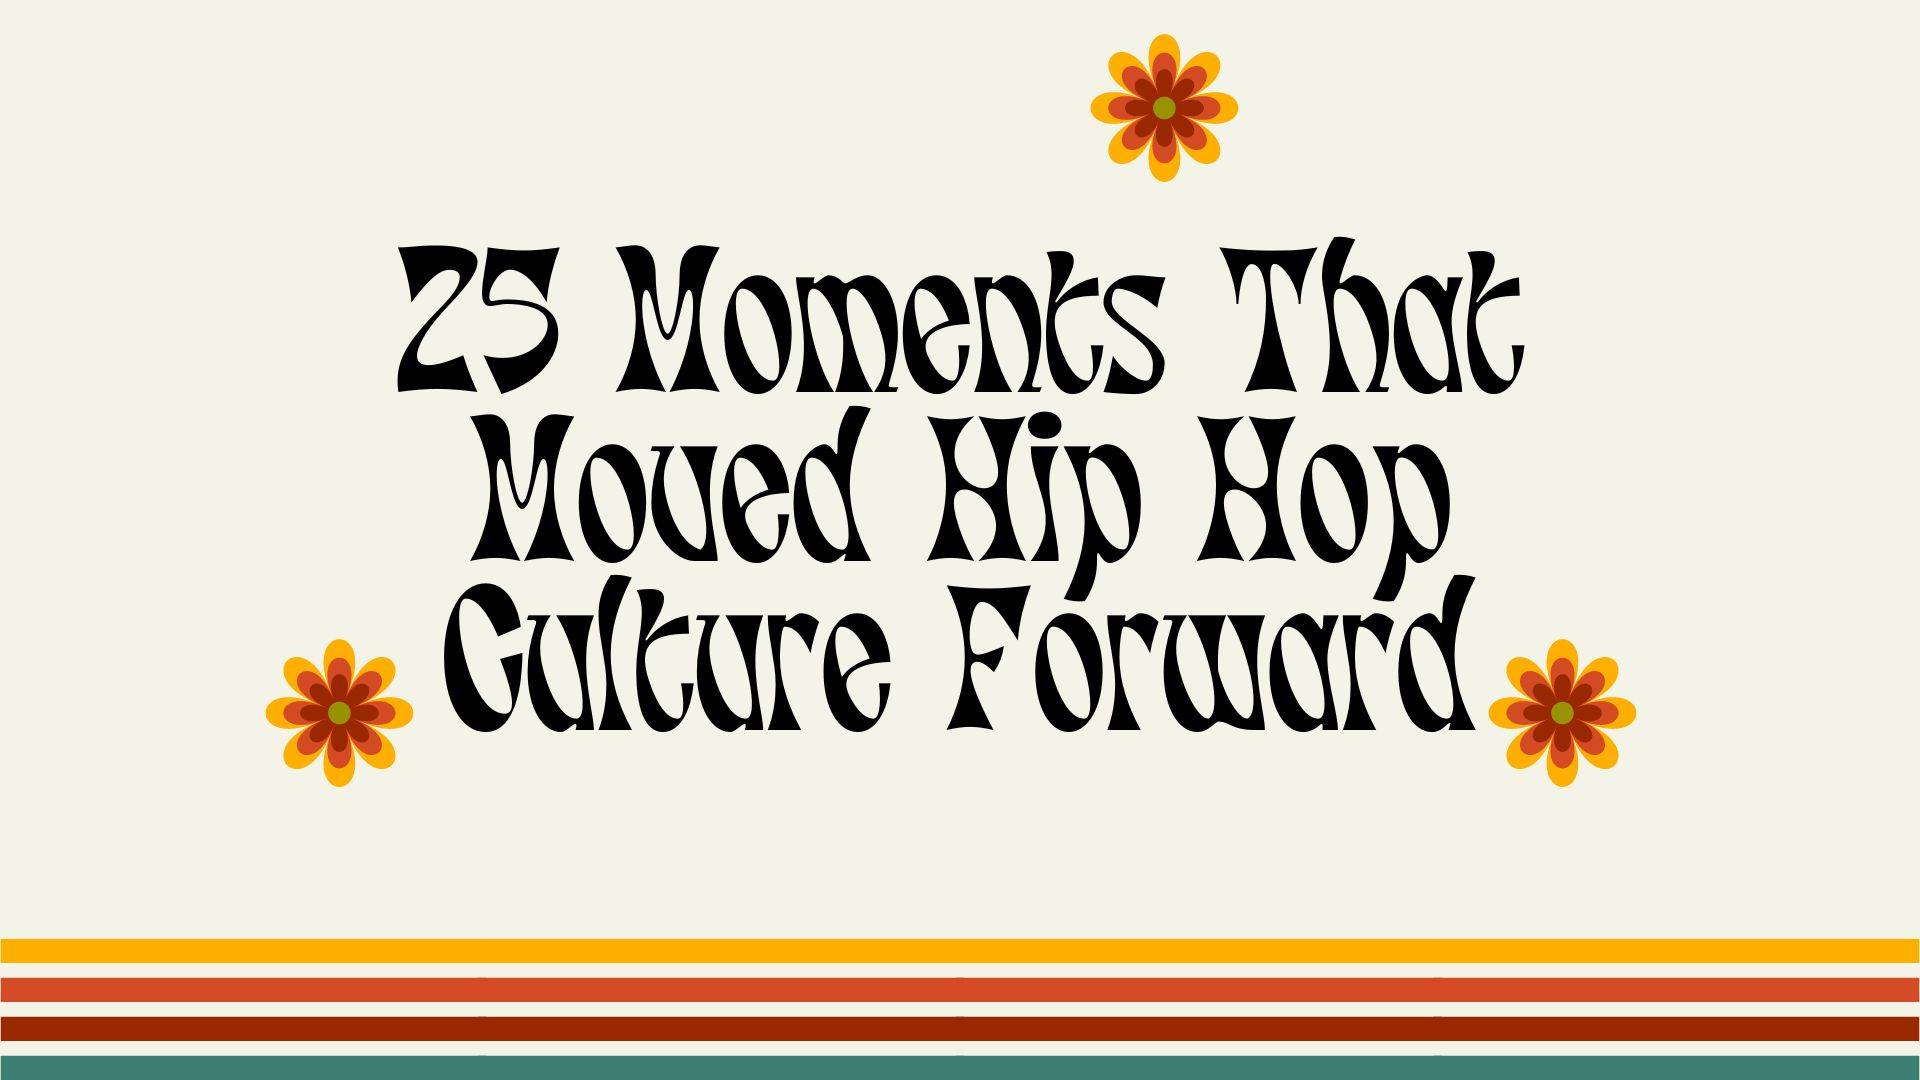 25 Moments That Moved Hip Hop Culture Forward, News